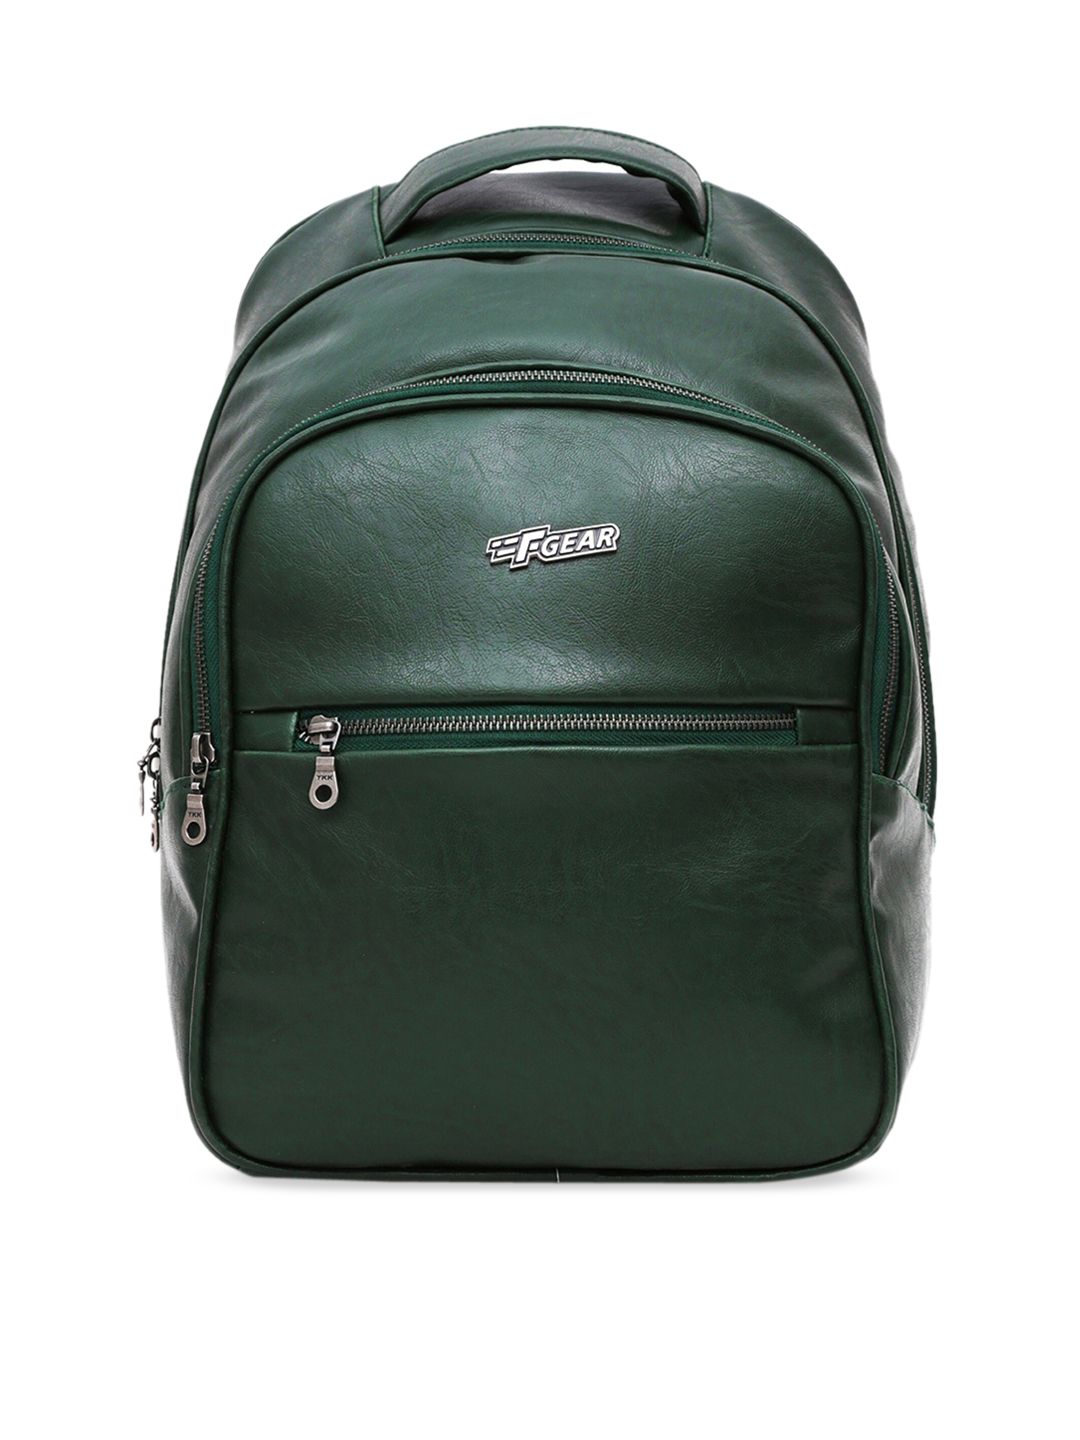 F Gear Unisex Green Solid Glorious Bottle Backpack Price in India